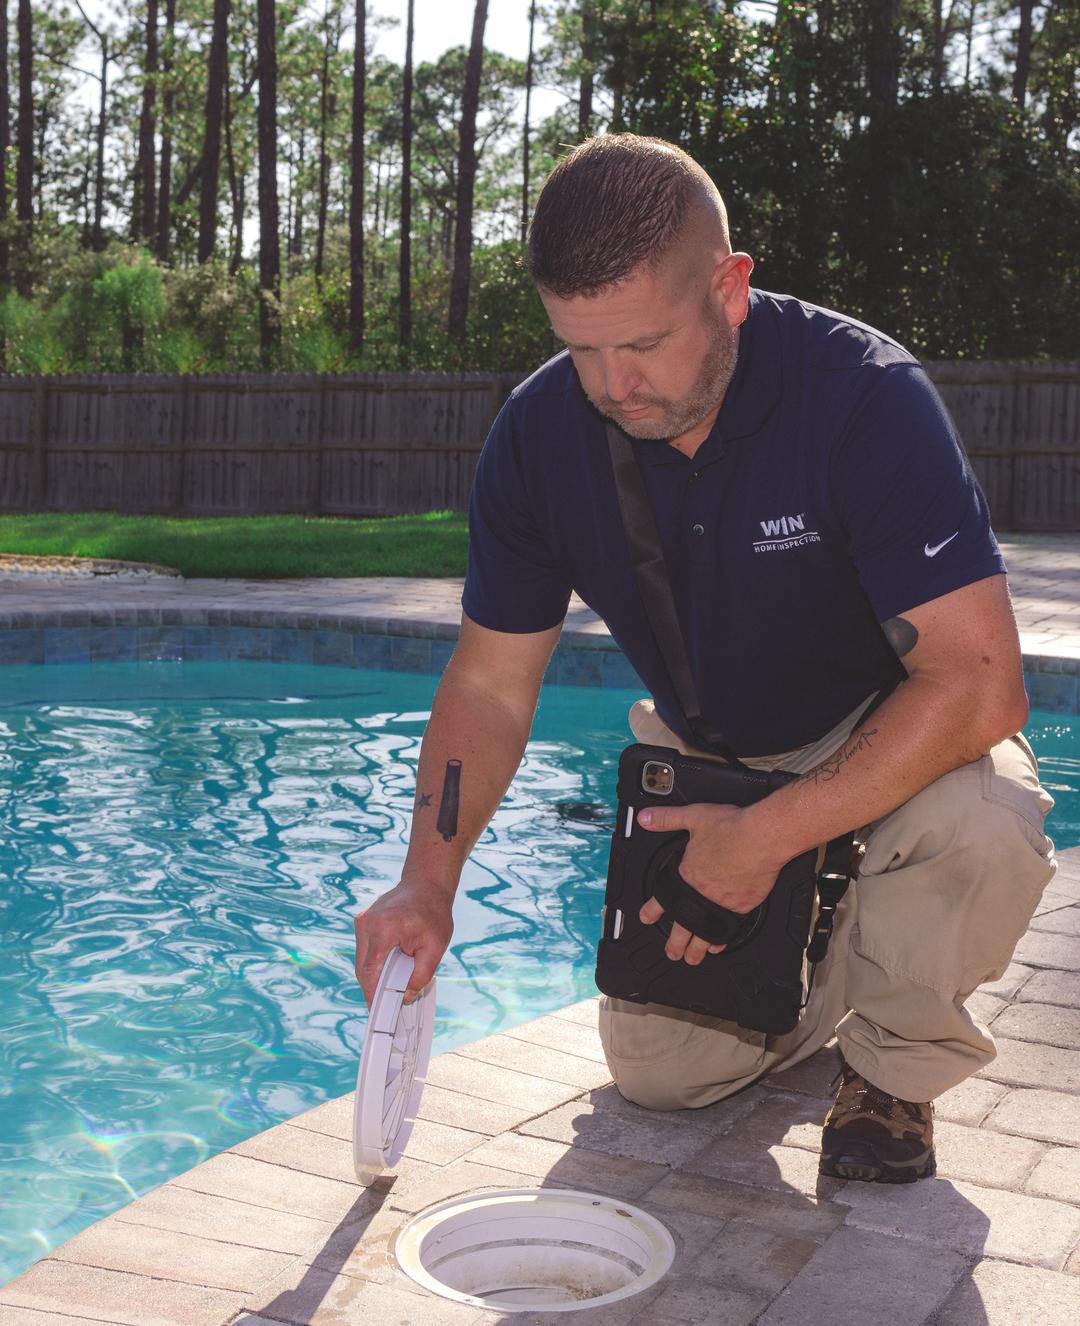 WIN Home Inspector inspecting the pool area